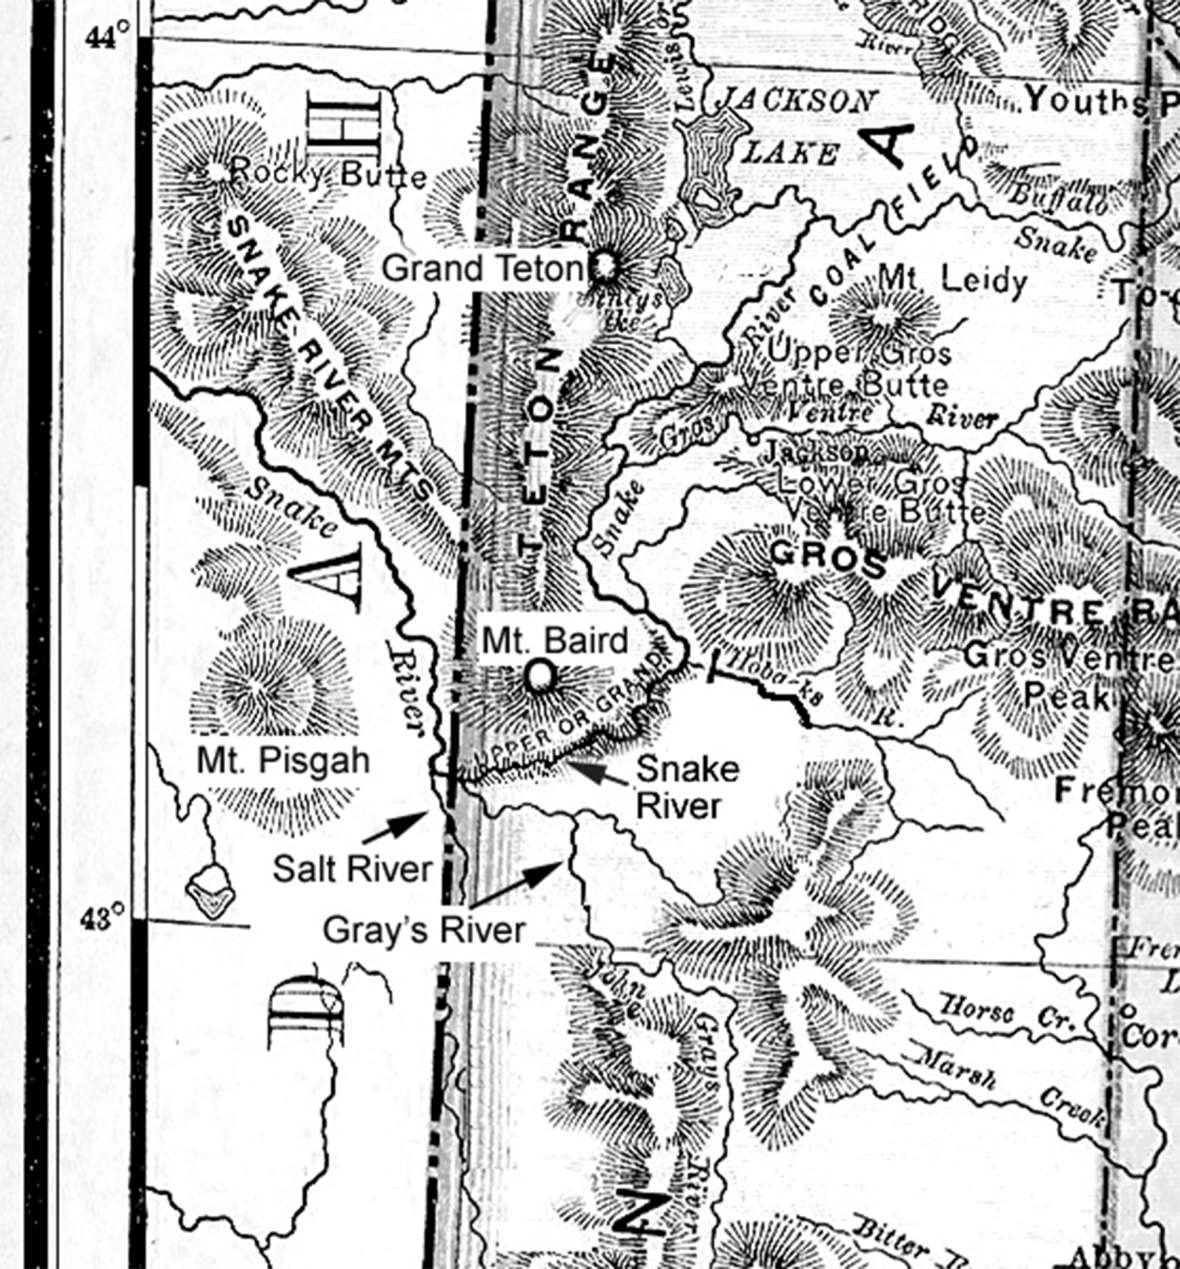 Part of an early map of Wyoming Territory showing the confluence of the Snake, Gray’s and Salt rivers near present Alpine, Wyo. south of Jackson, where the survey party had such a difficult time crossing the Snake River. Author’s collection.